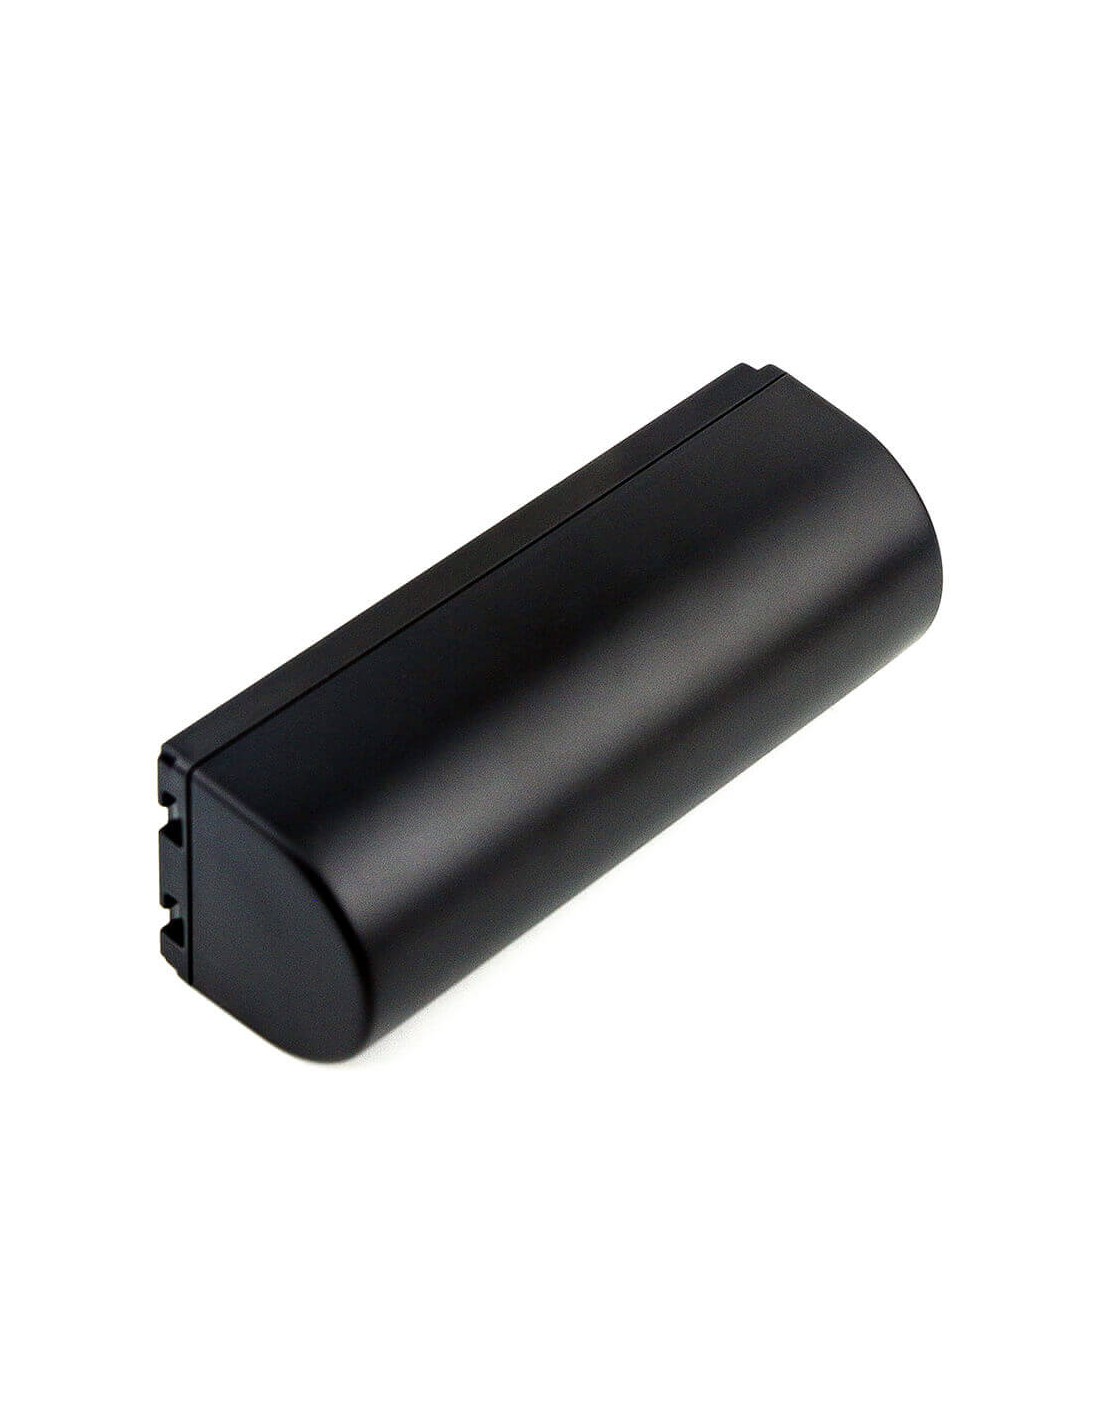 Battery for Canon, Selphy Cp- 500, Selphy Cp-100, Selphy Cp-10 22.2V, 2000mAh - 44.40Wh